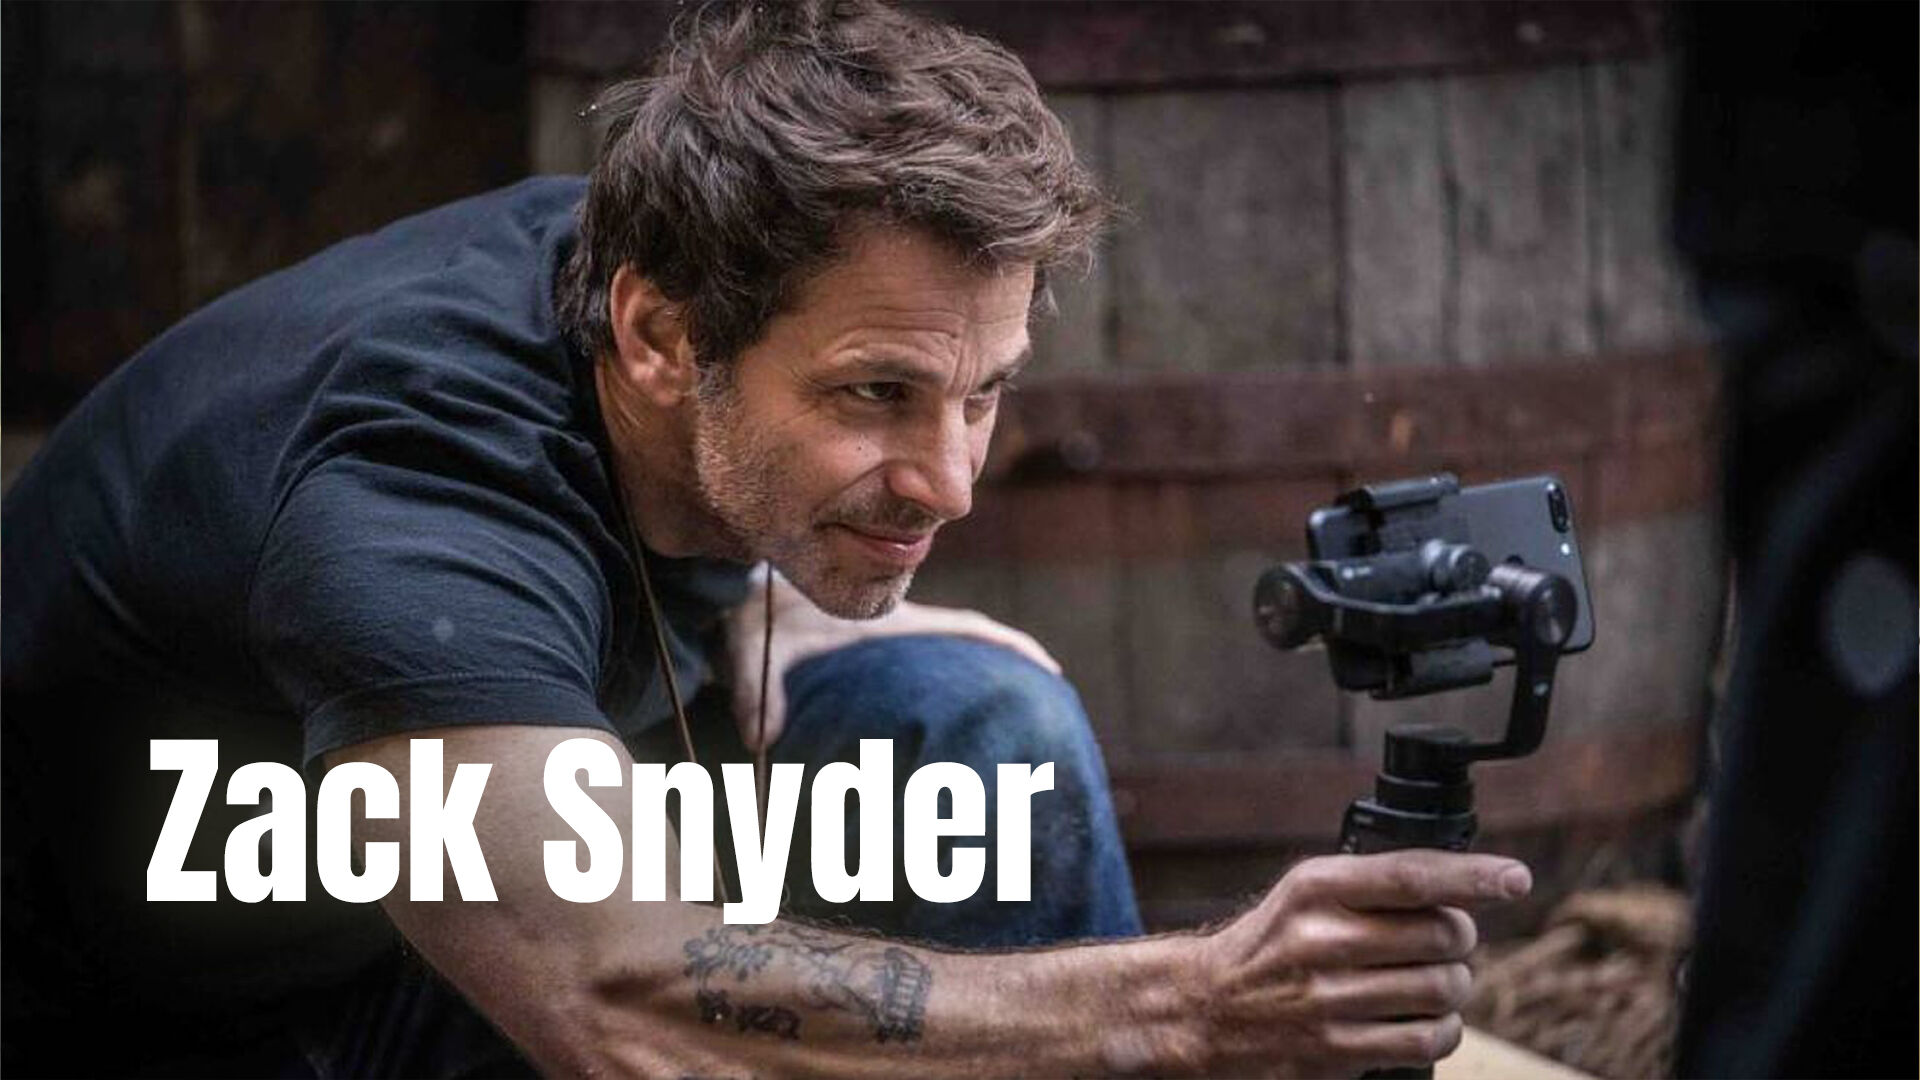 Must see: all eyes on the director | Zack Snyder